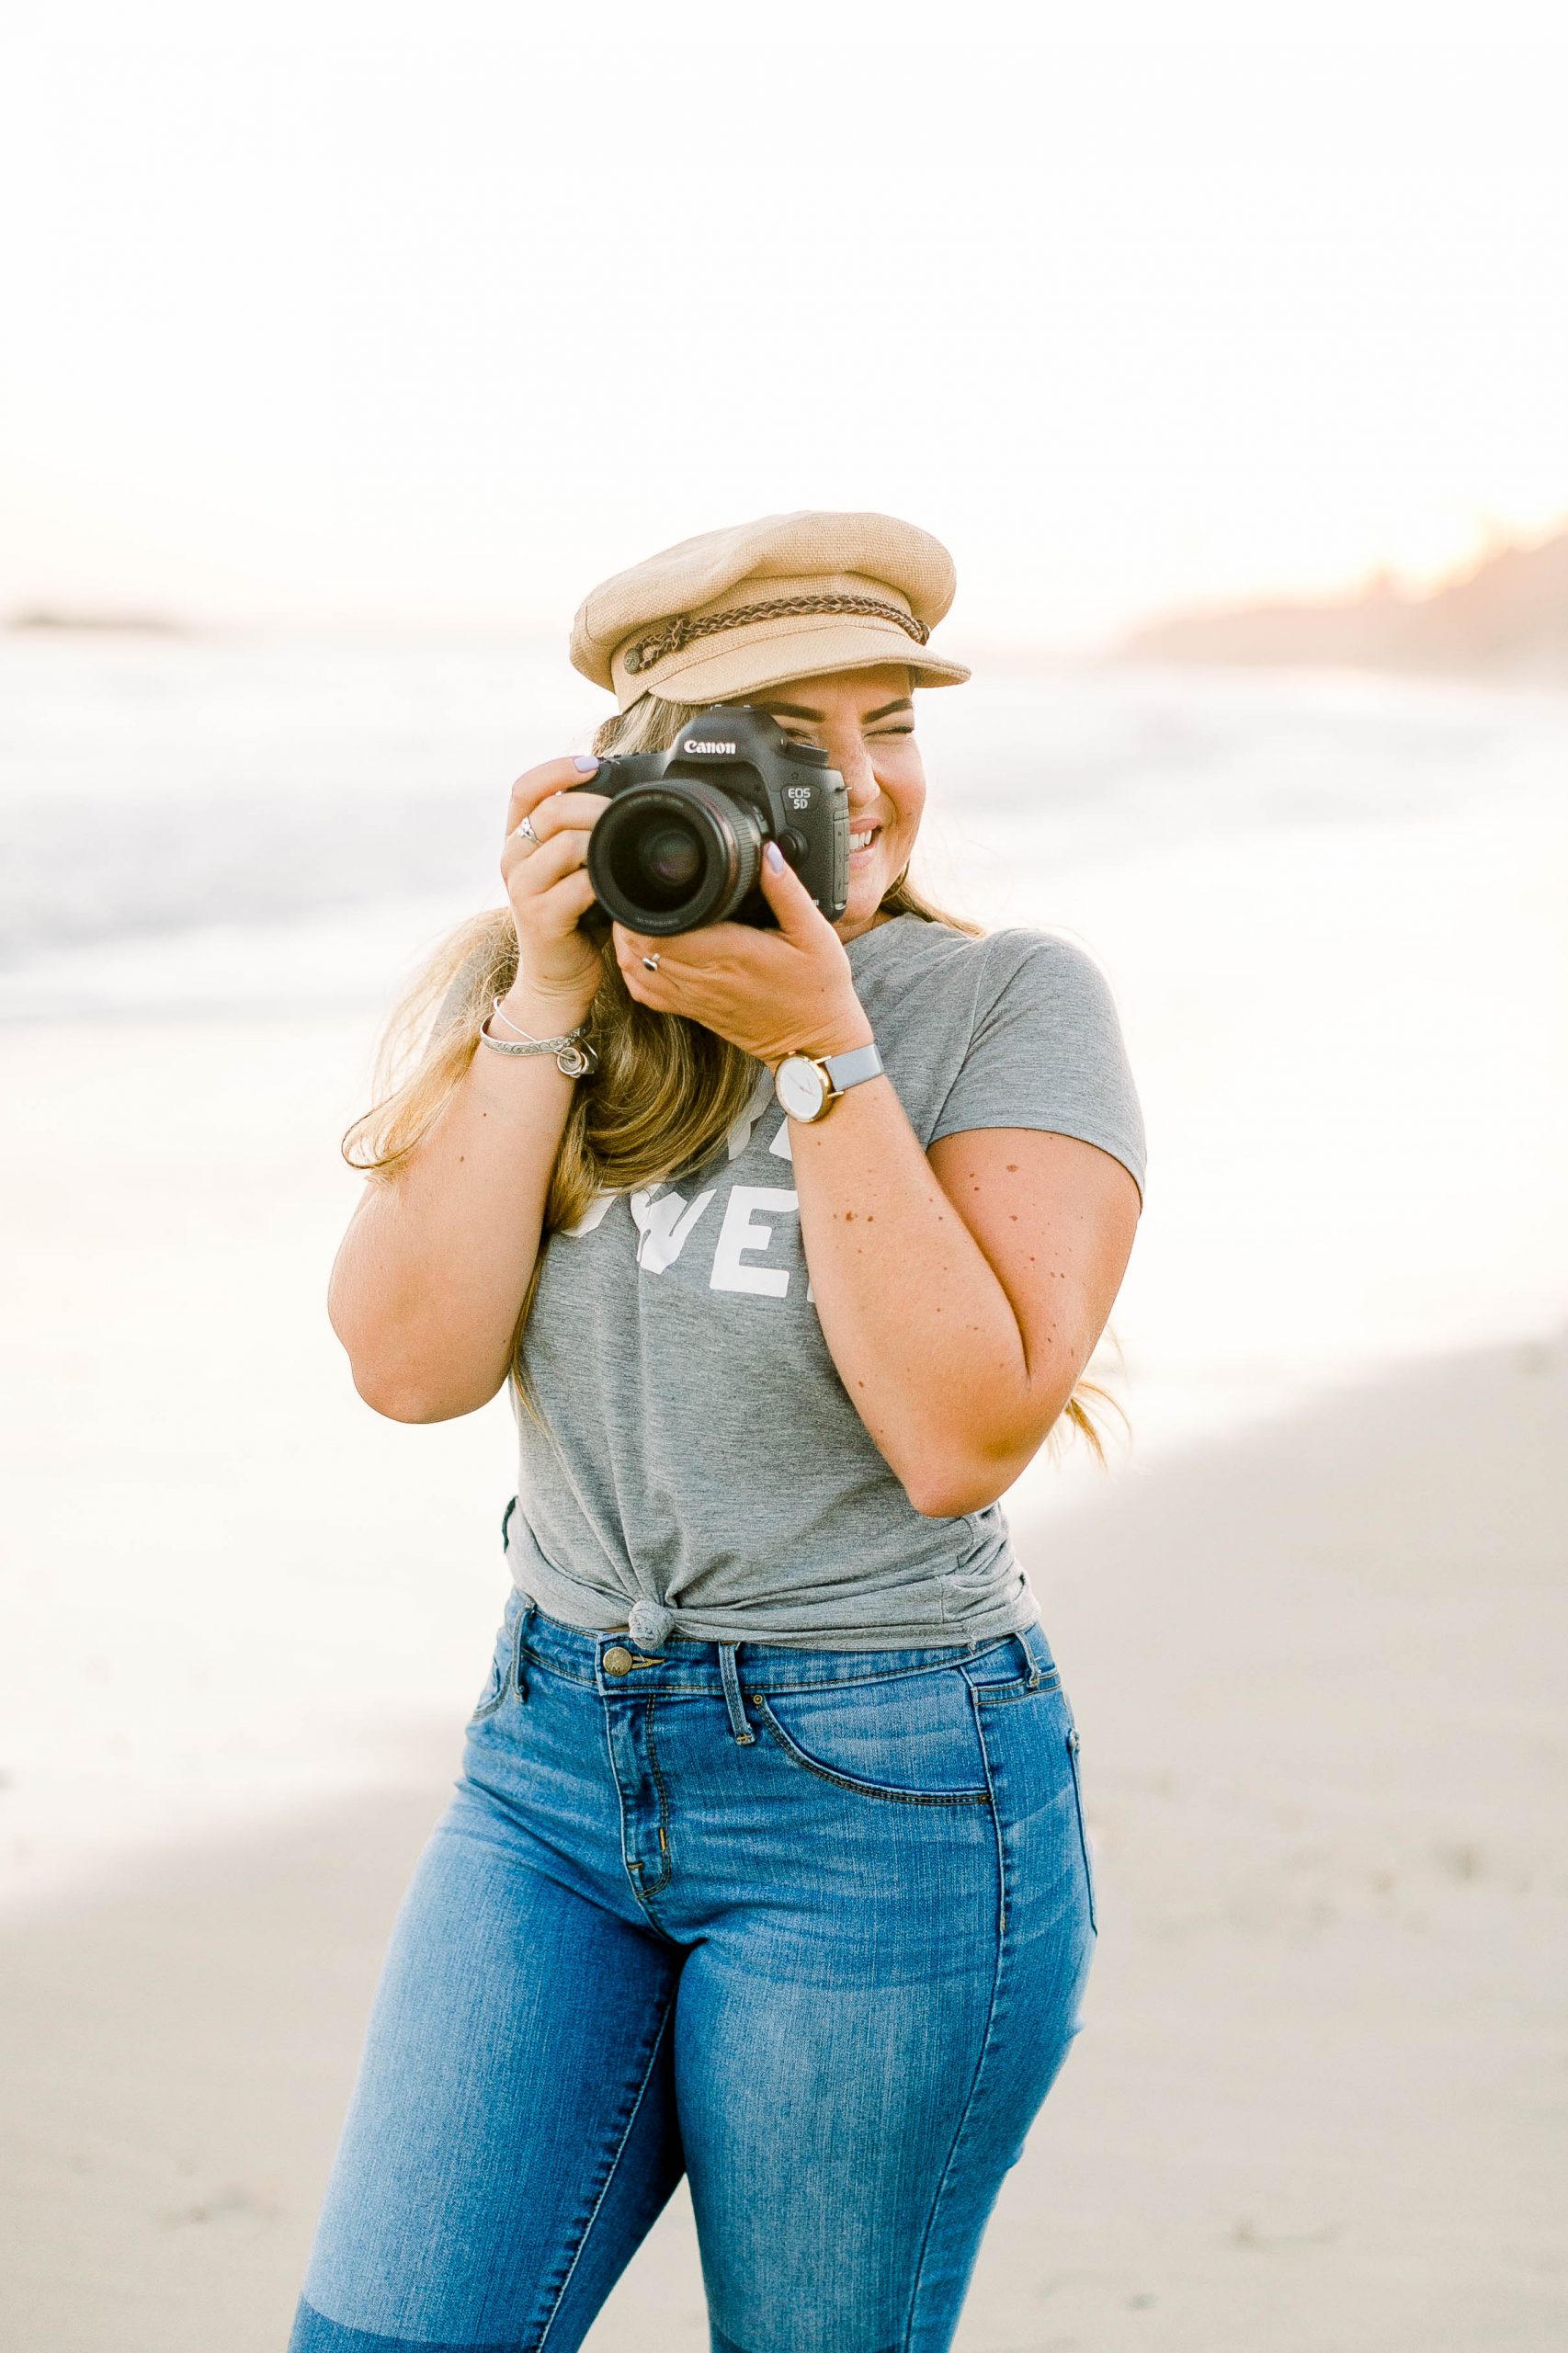 Woman holding camera up to her eye at beach